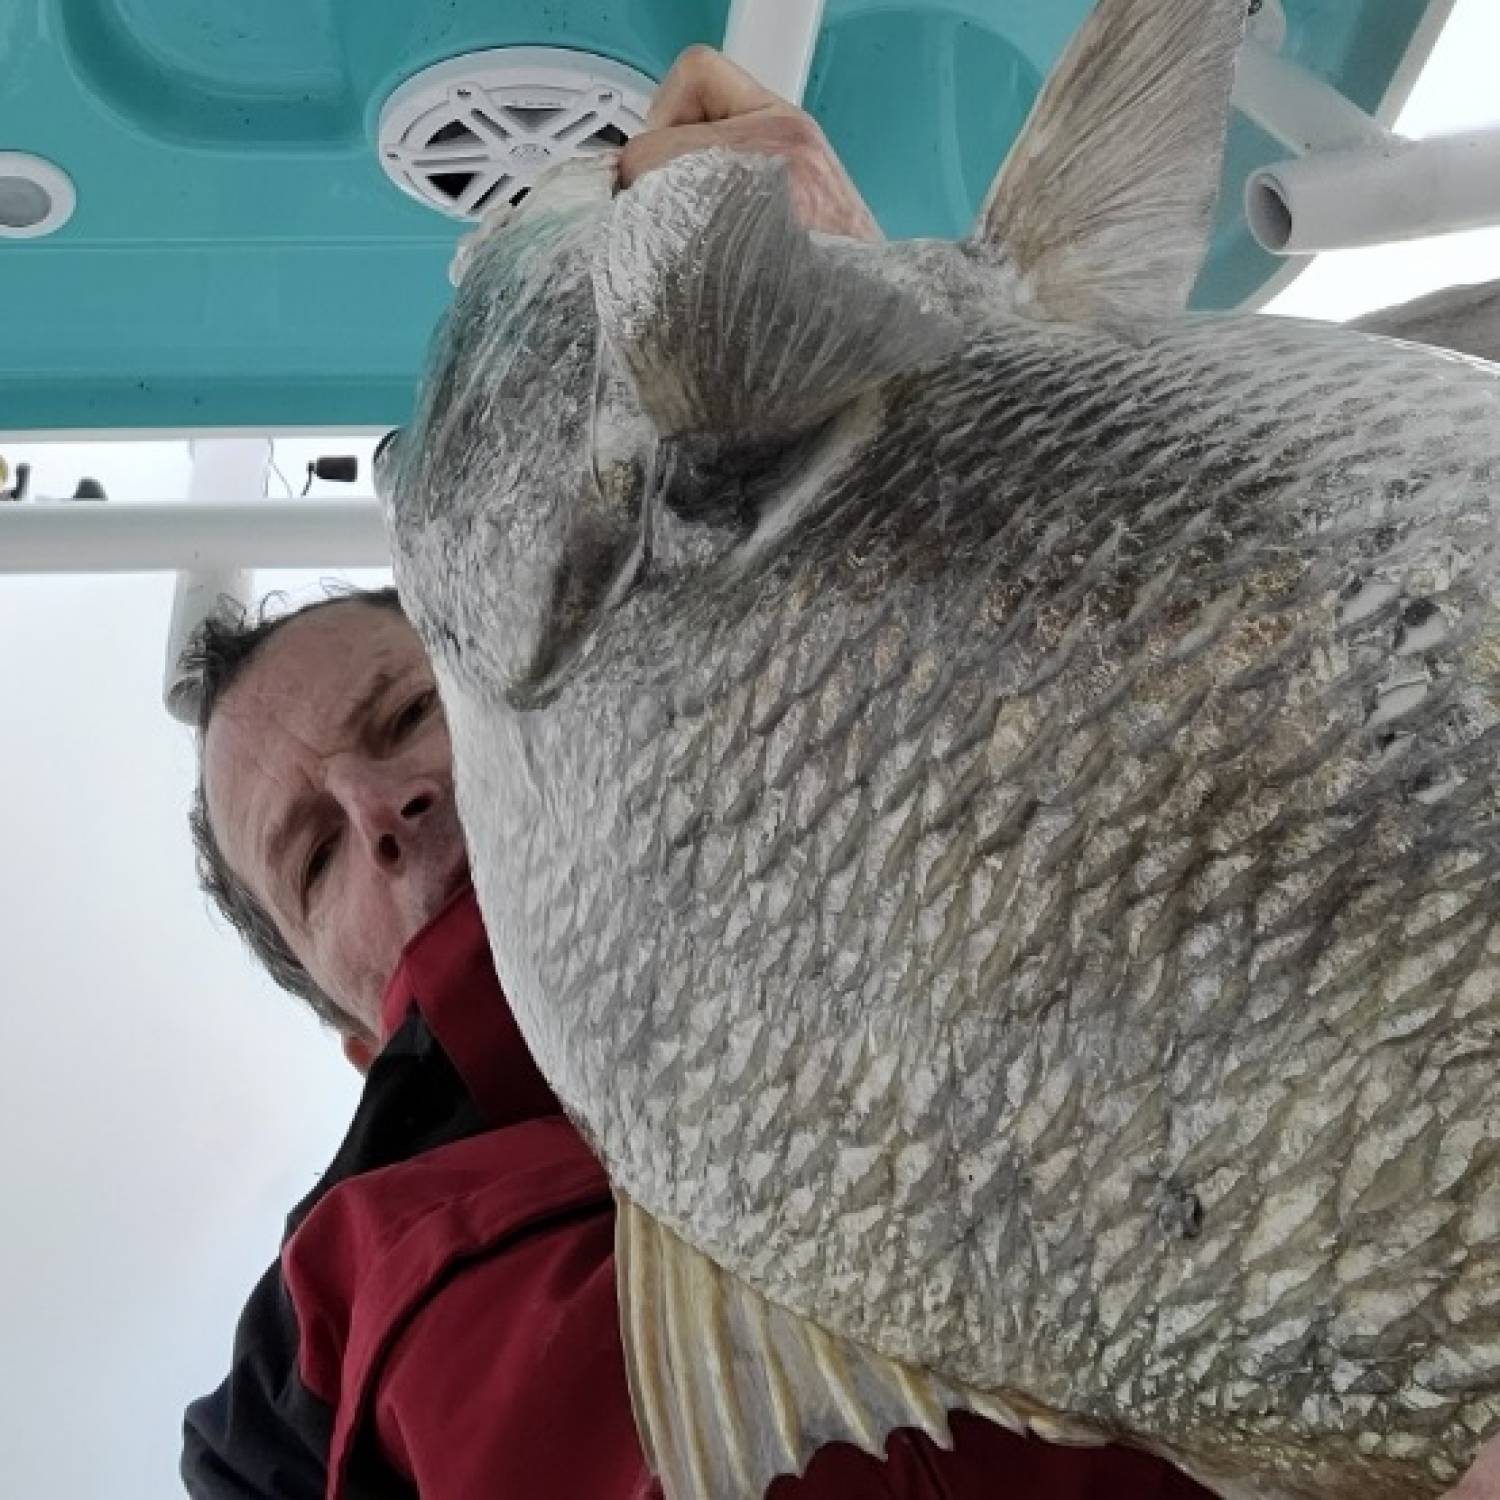 Title: Big Uglies Rule - On board their Sportsman Open 212 Center Console - Location: Aransas Pass Texas. Participating in the Photo Contest #SportsmanFebruary2023